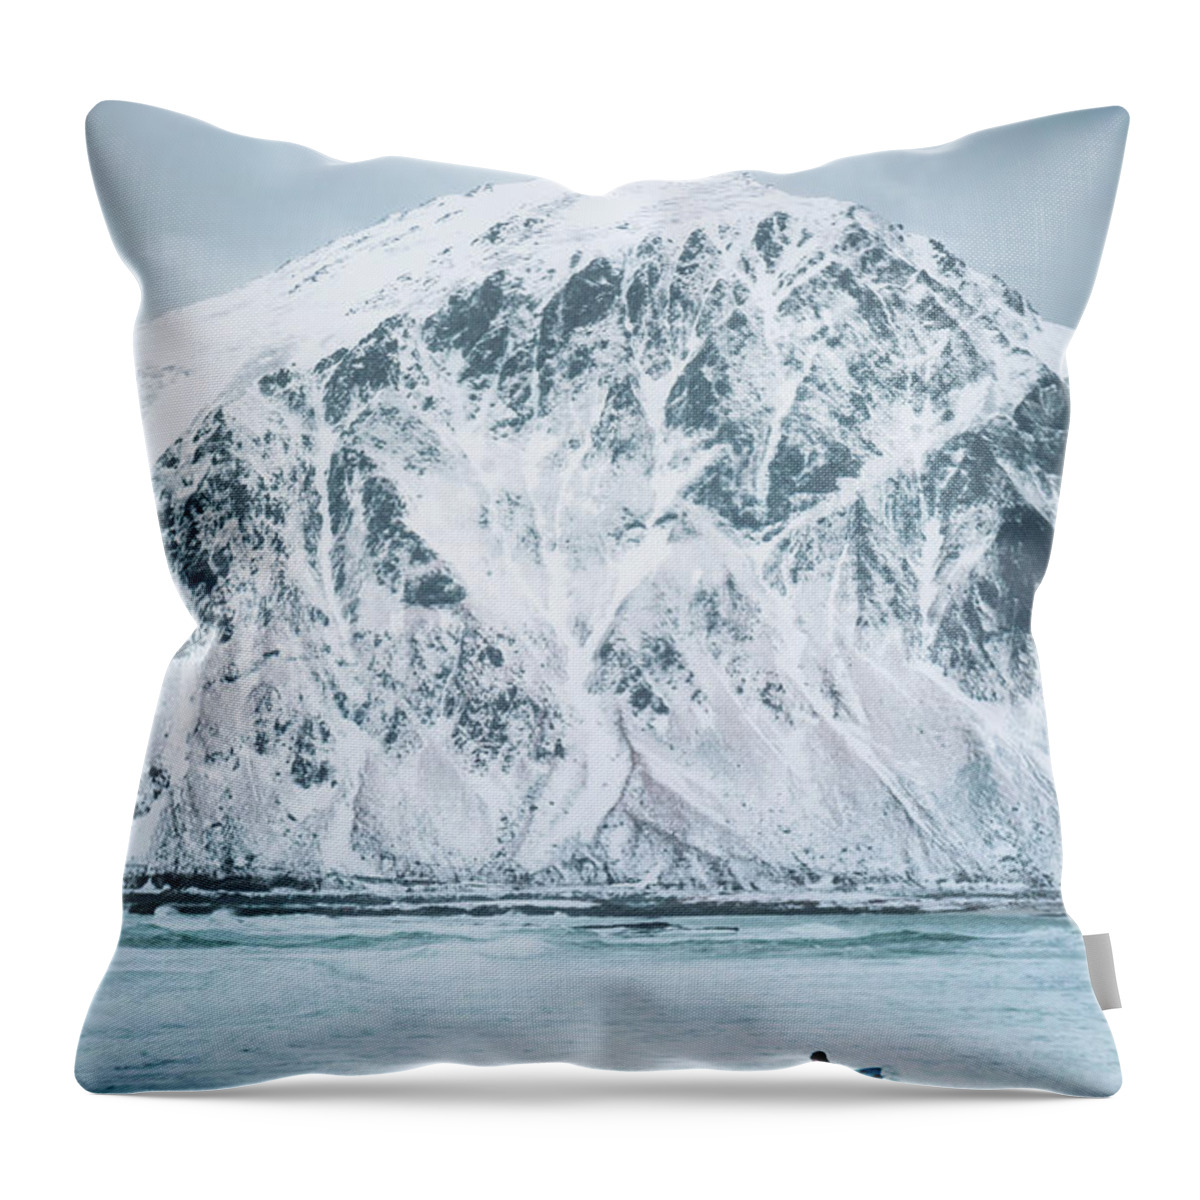 Kremsdorf Throw Pillow featuring the photograph To Ride The Arctic Waves by Evelina Kremsdorf